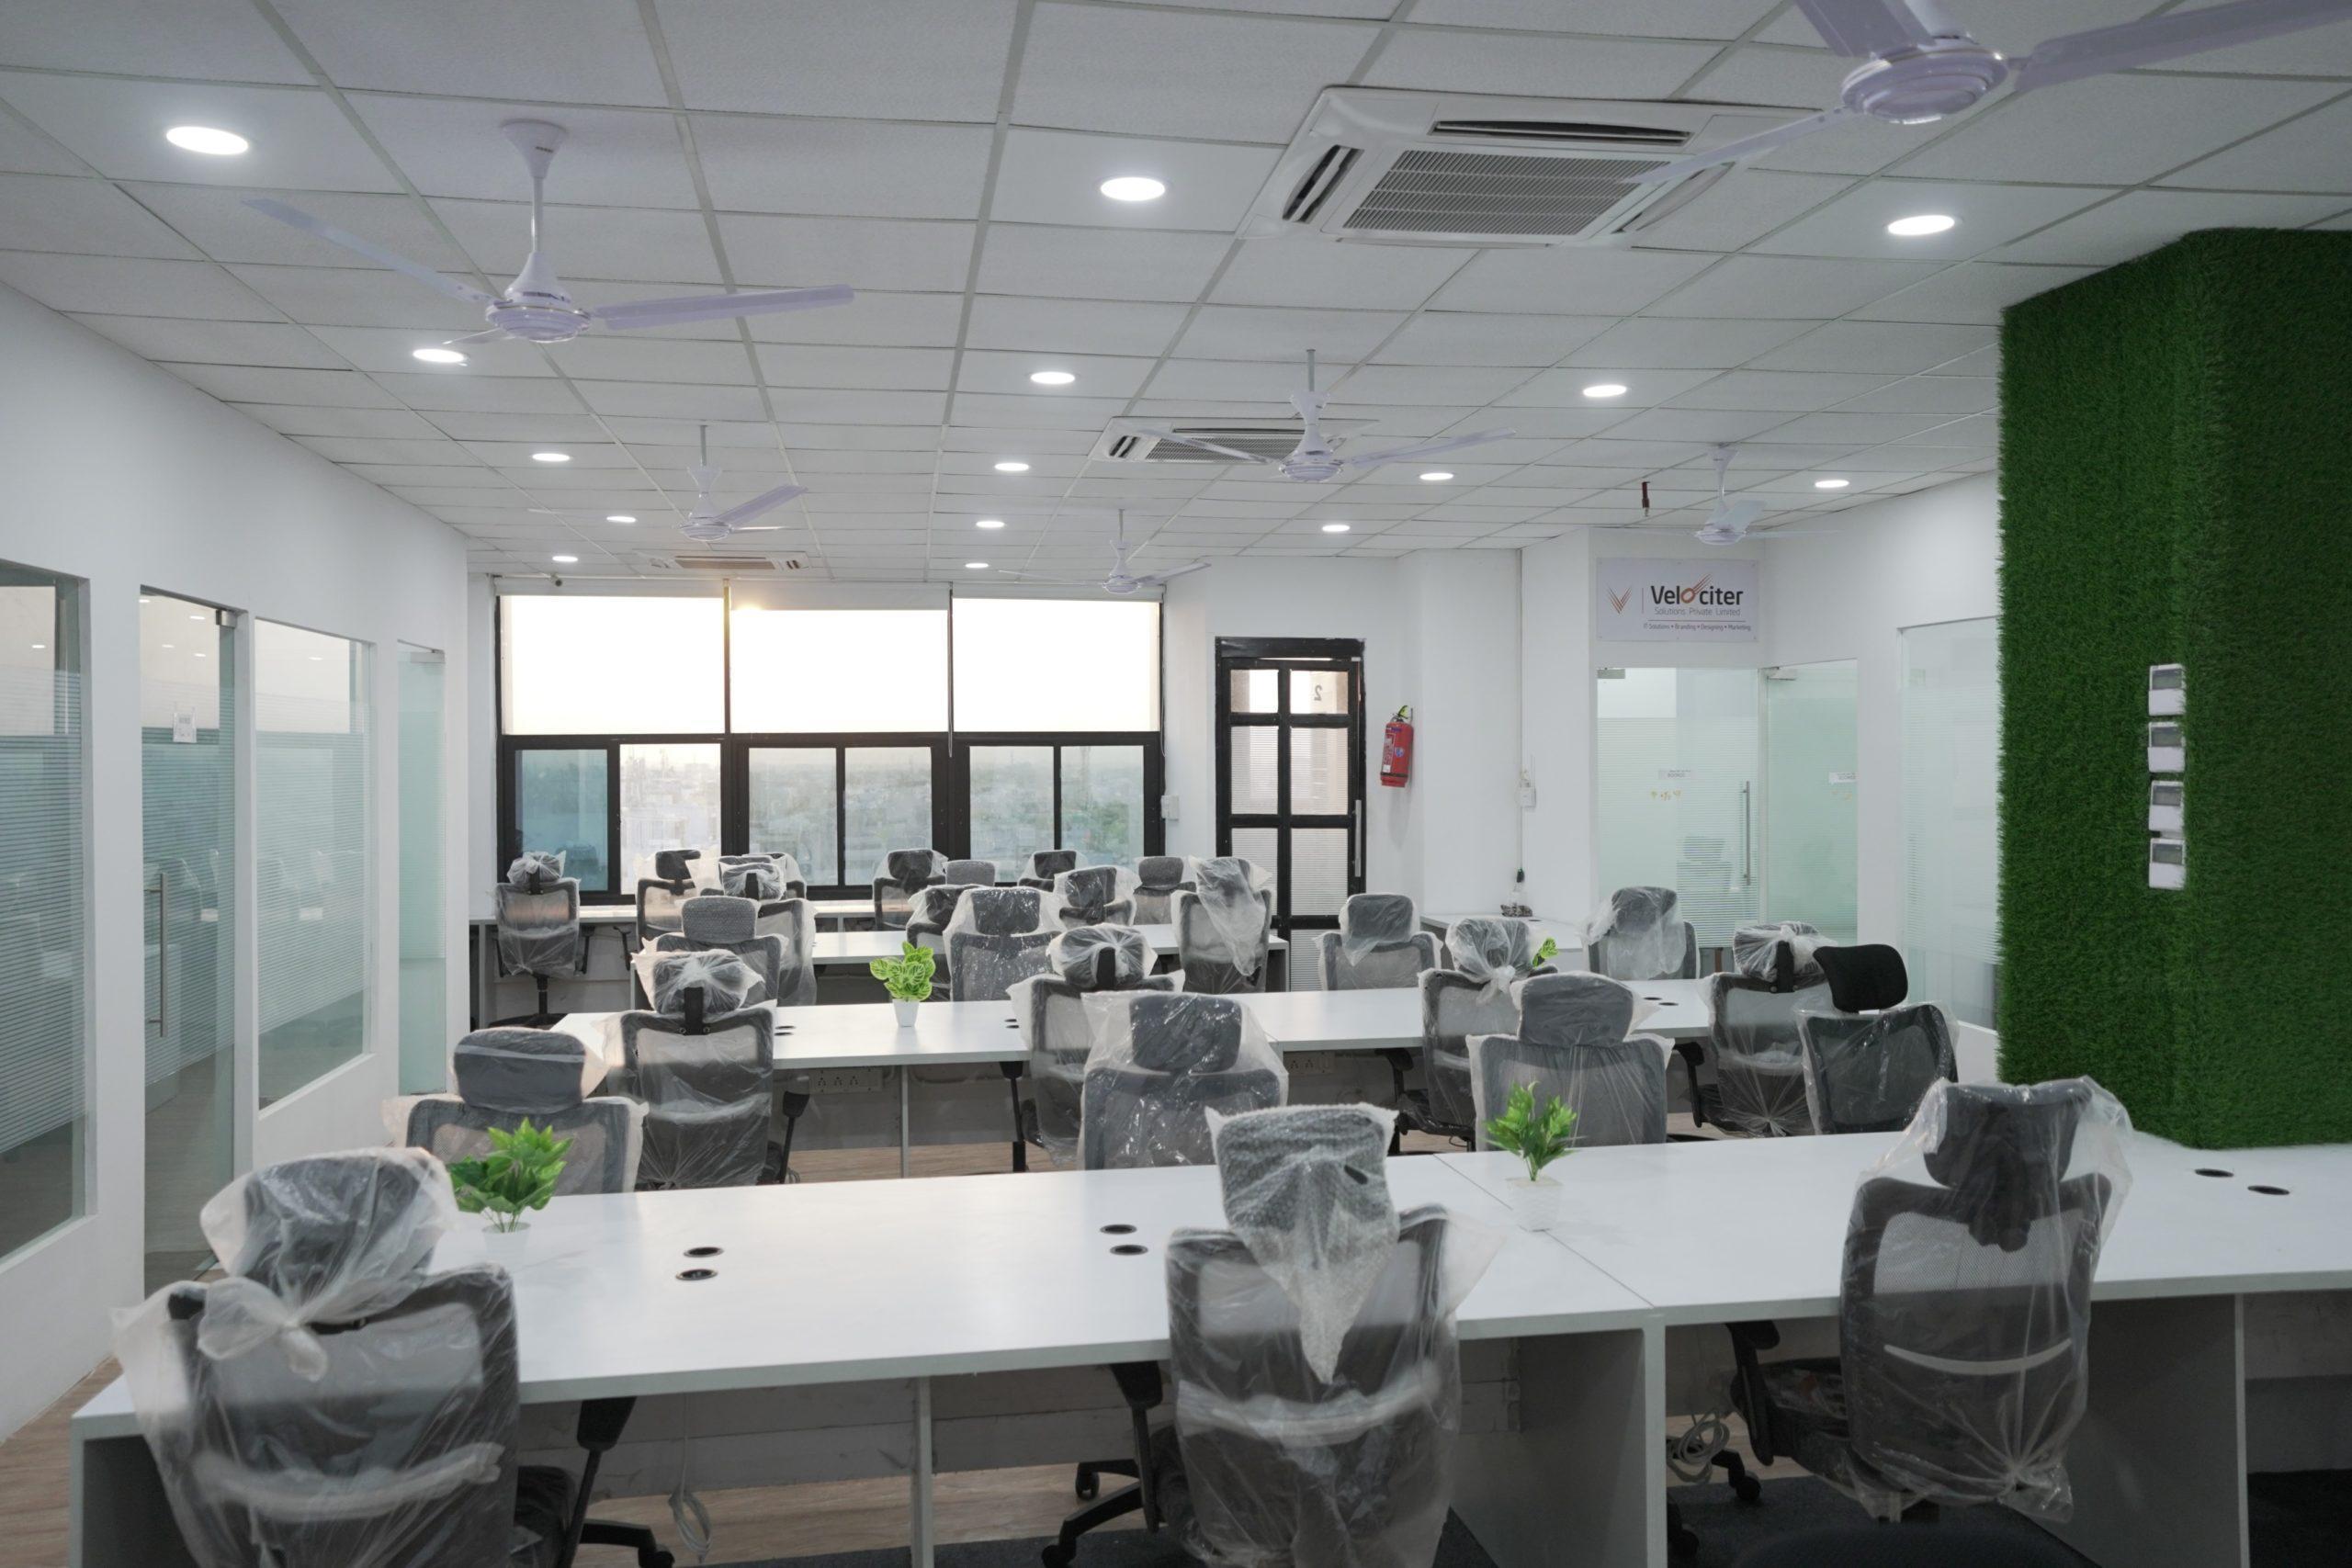 Introducing VIRTUAL COWORKS, Indore’s first private incubator, and coworking space.